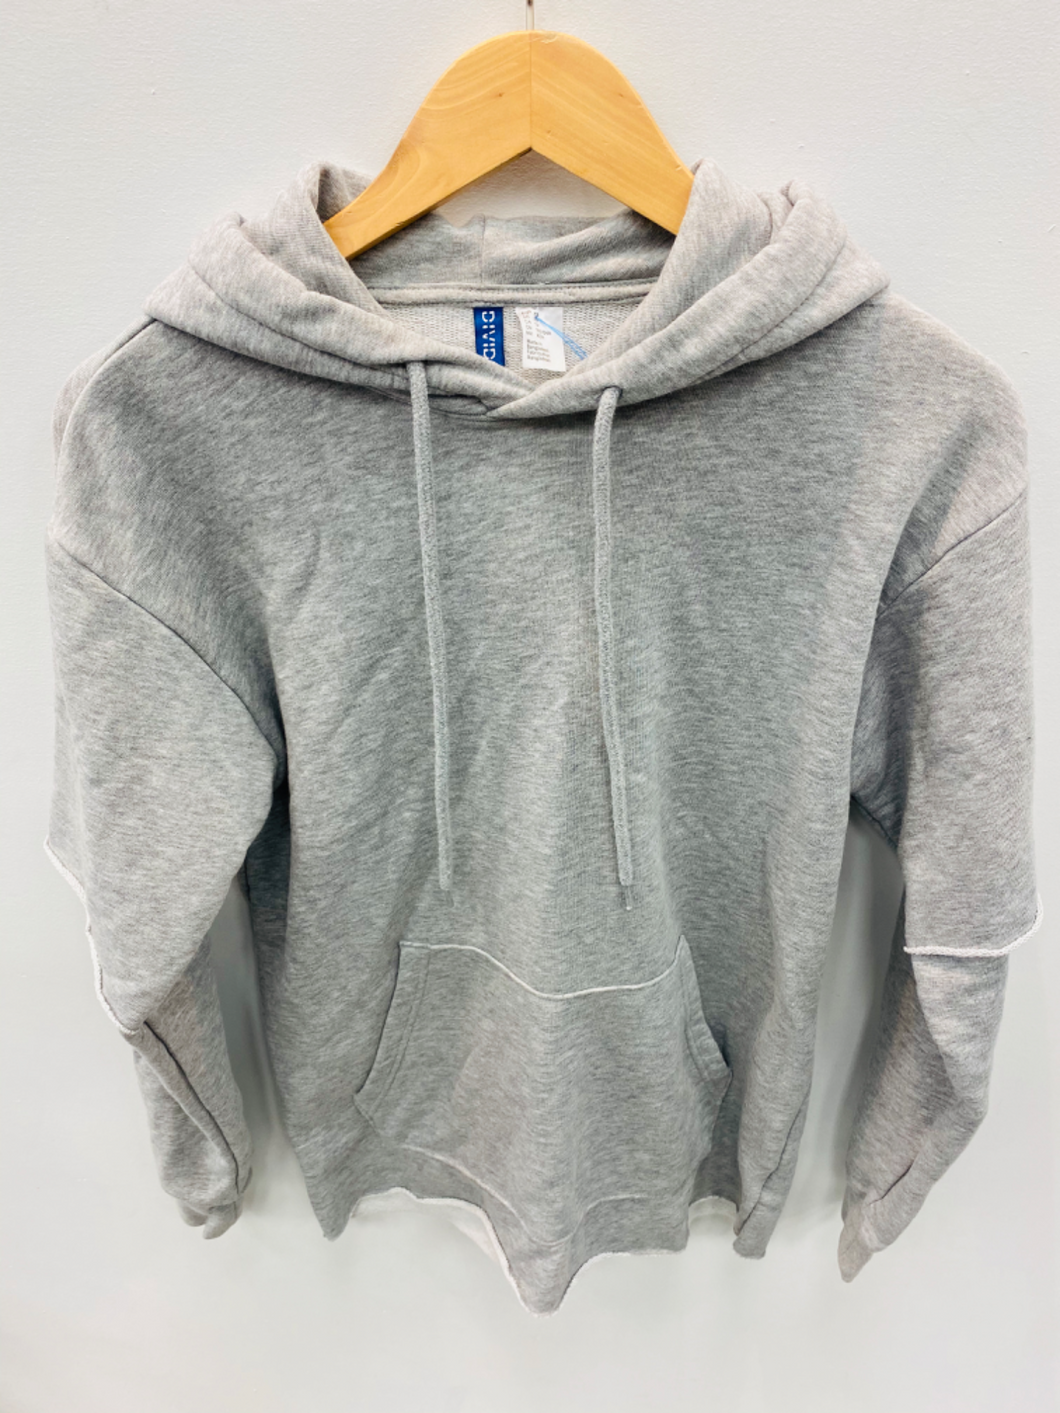 Divided Sweatshirt Size Extra Small